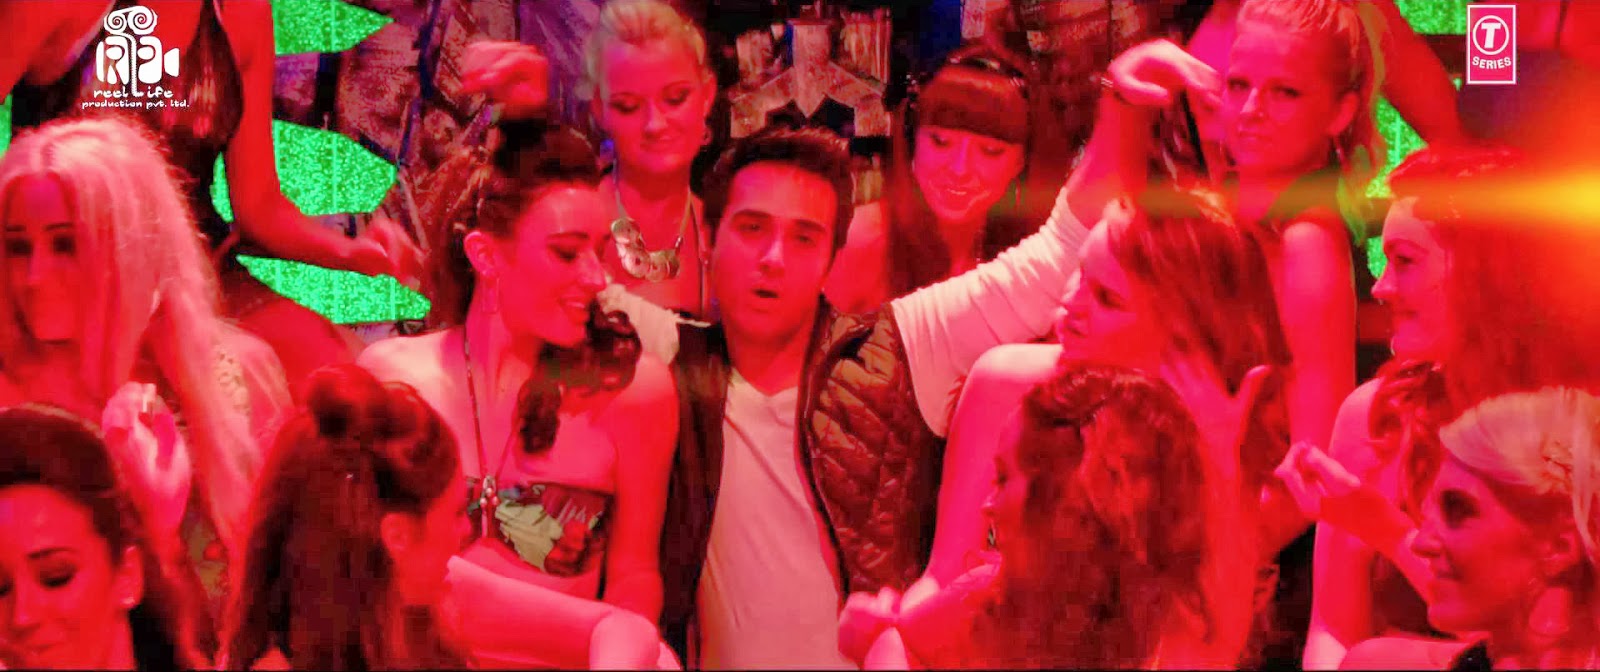 Butt Patlo - O Teri (2014) Full Music Video Song Free Download And Watch Online at worldfree4u.com